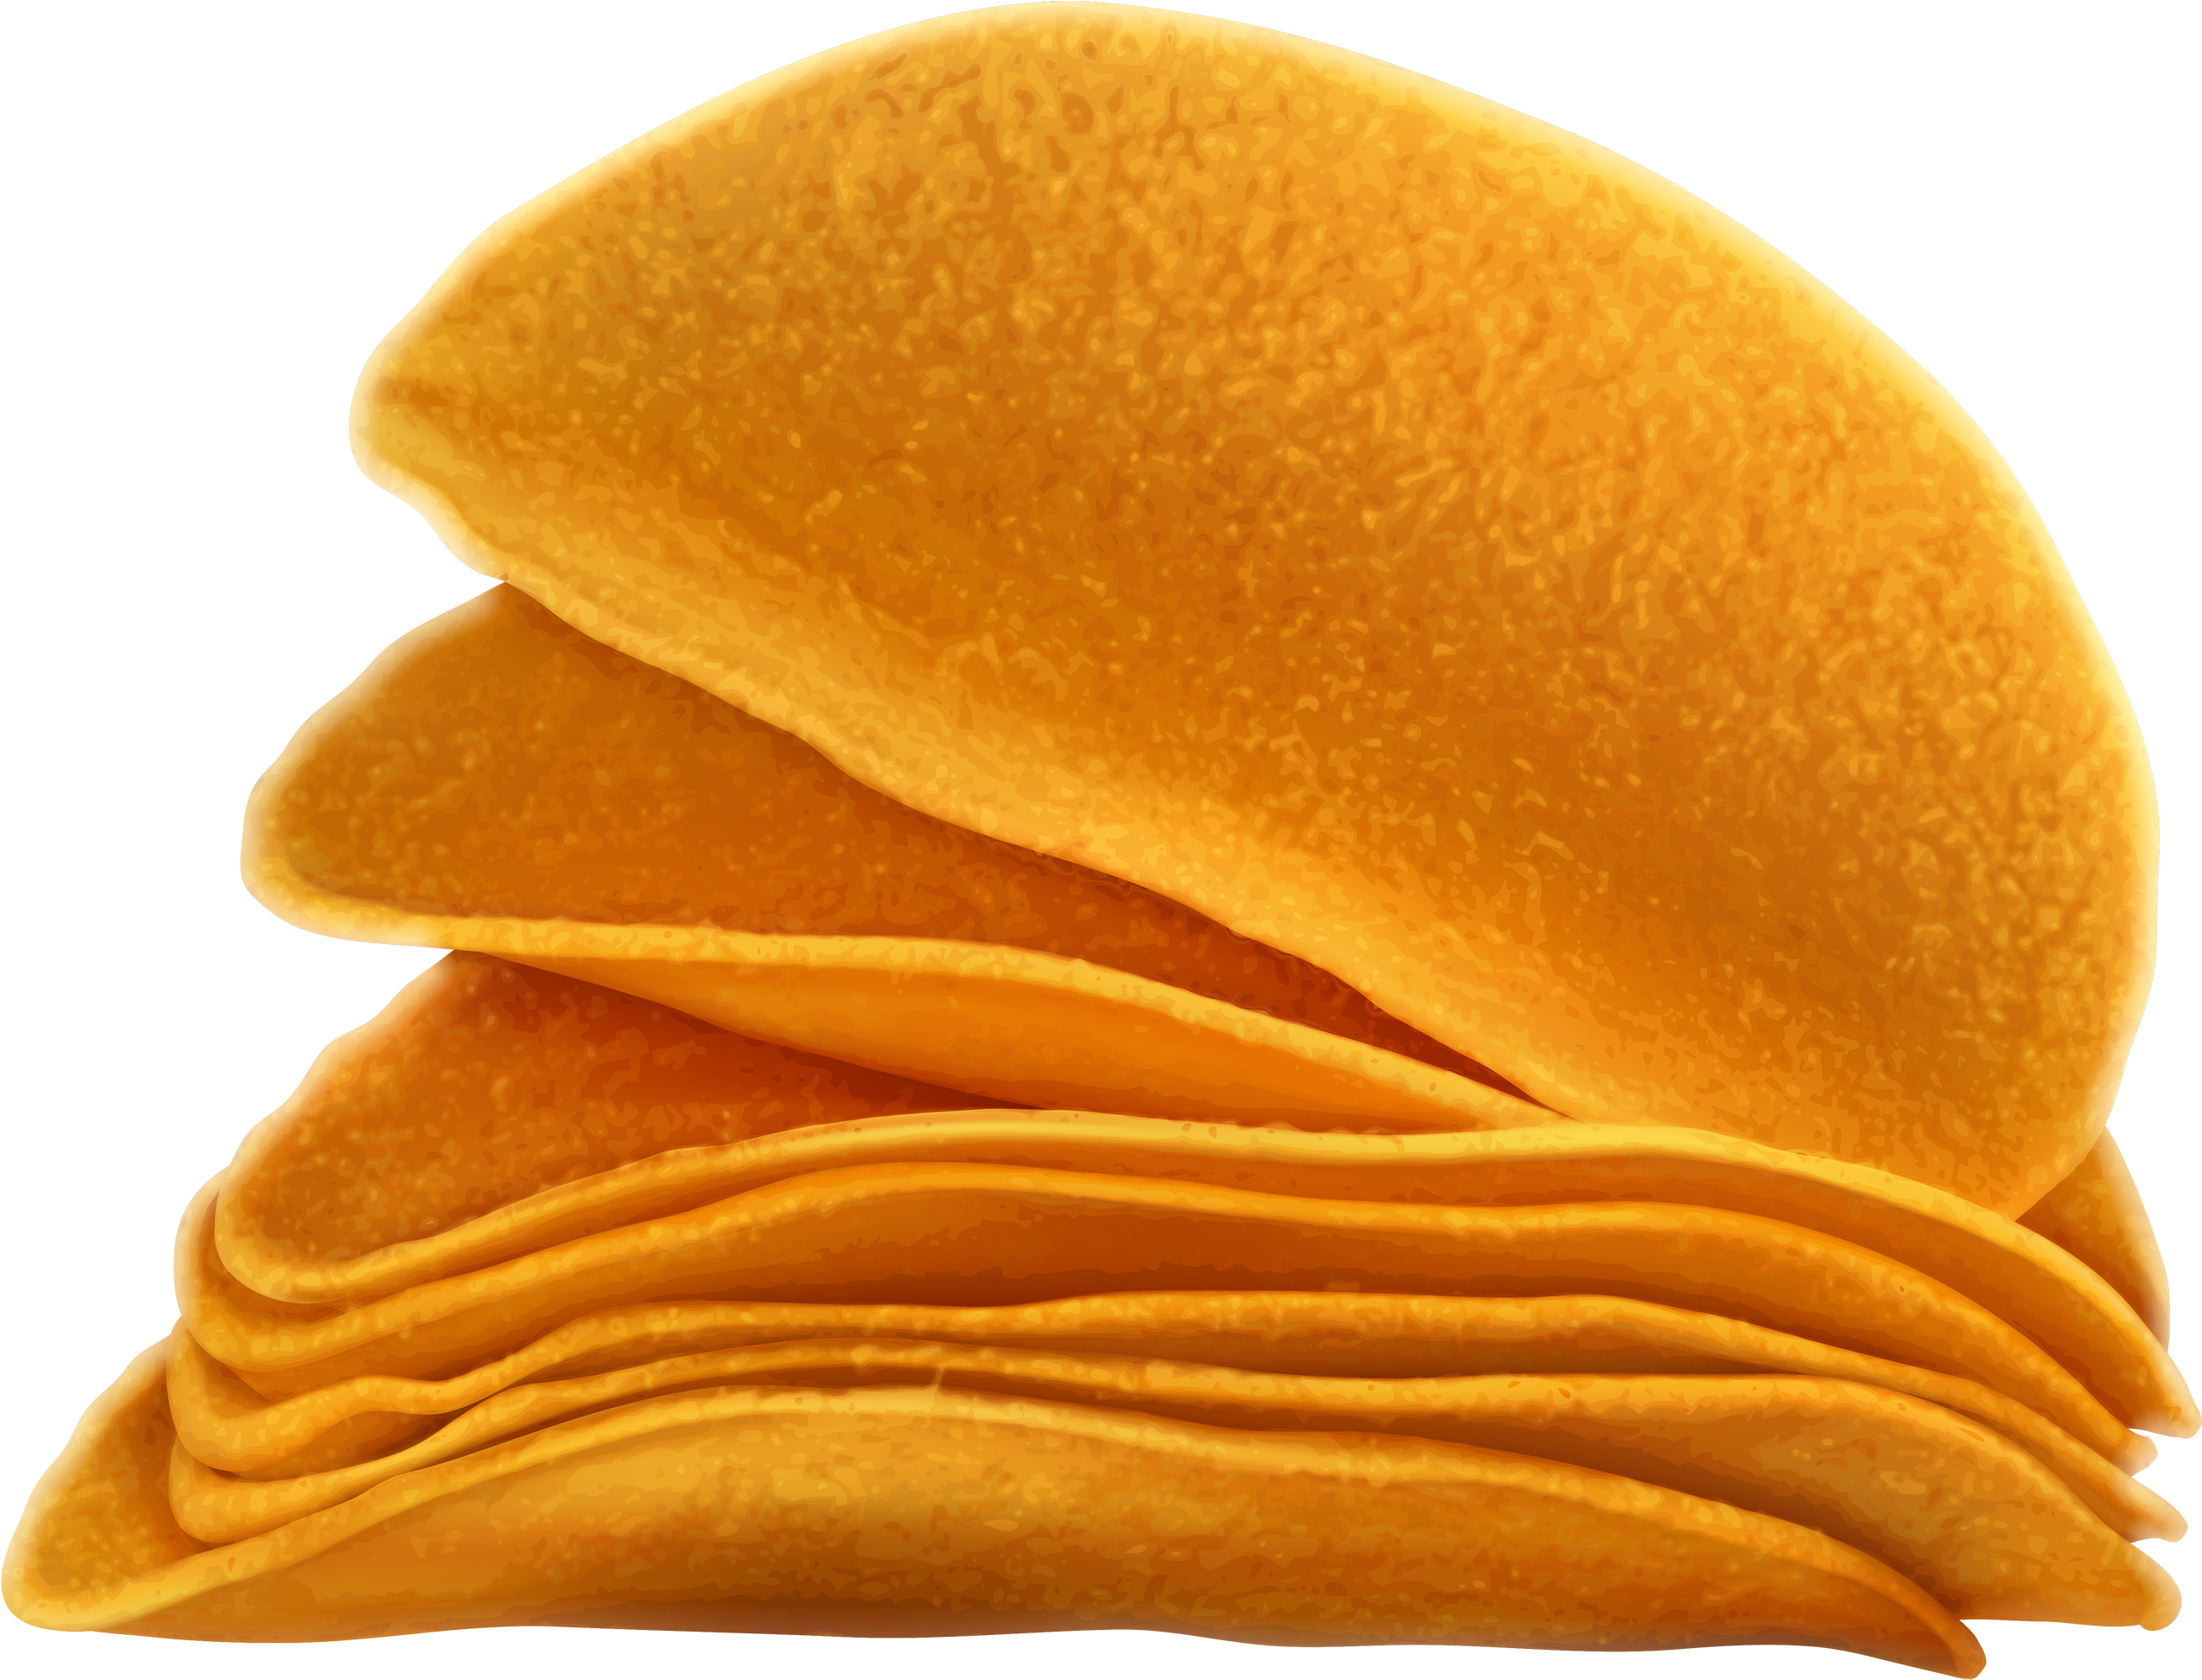 A Stack Of Tortillas On A Black Background